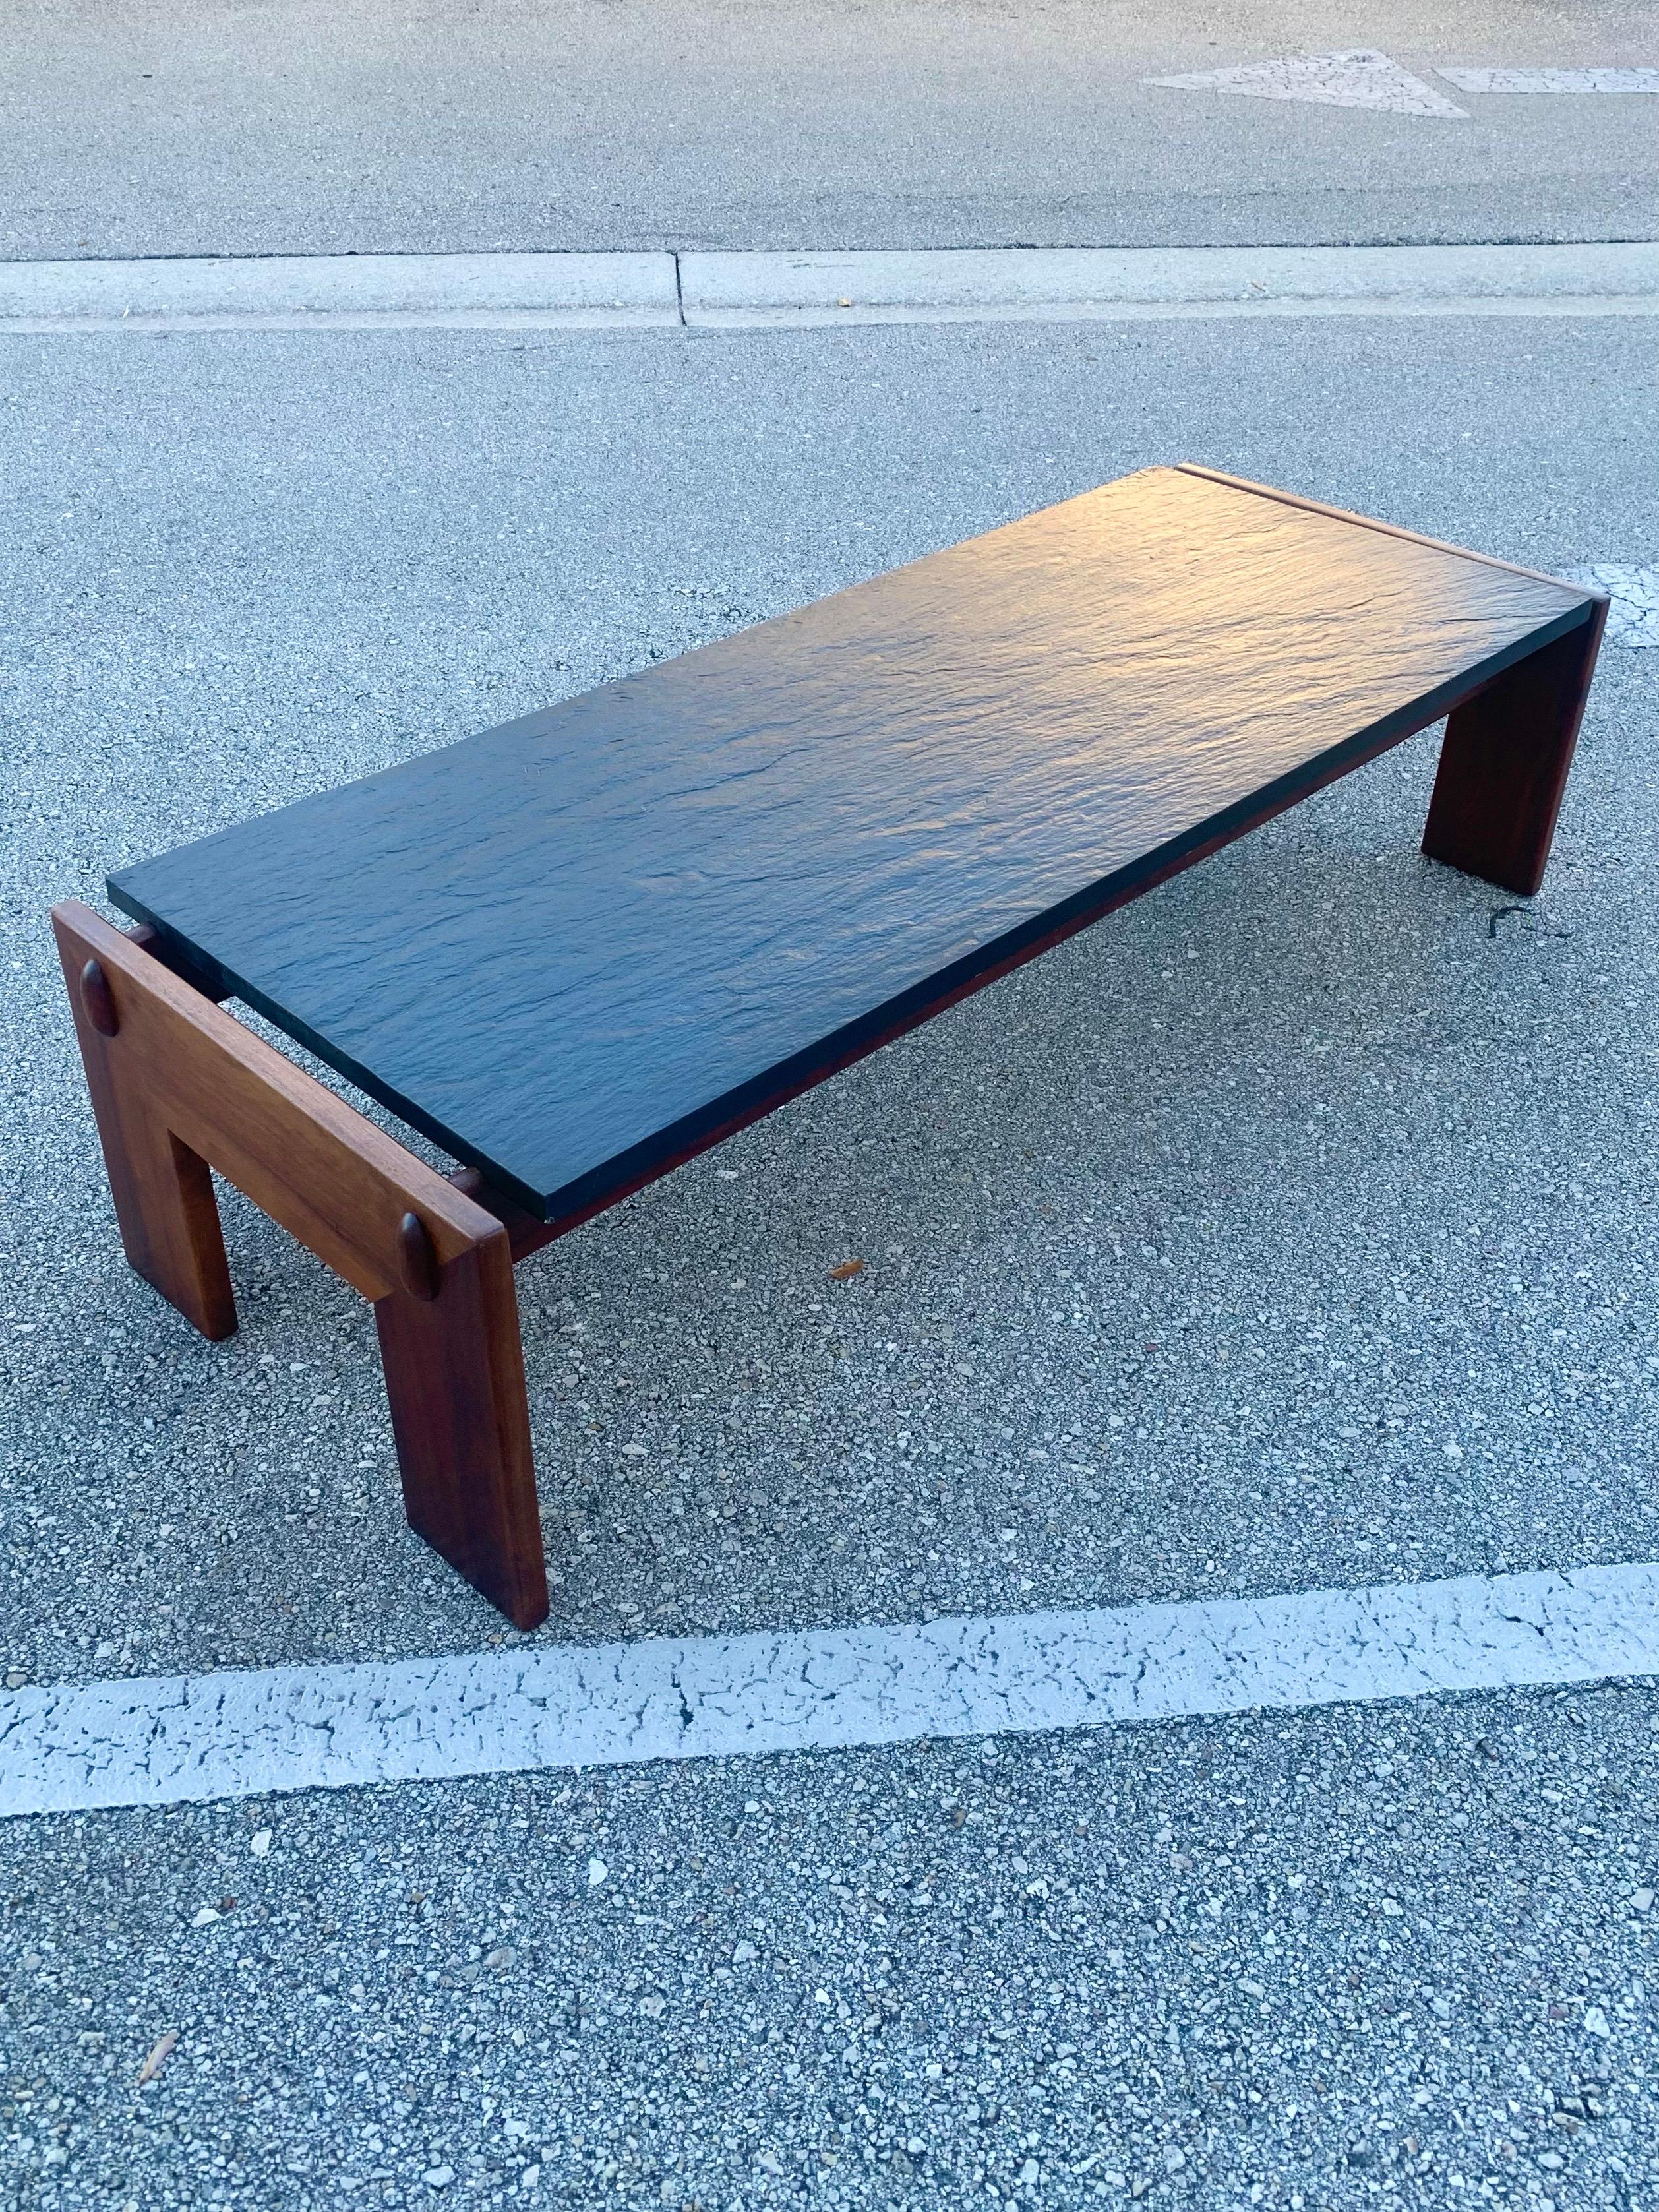 Coffee table by Adrian Pearsall. Solid walnut frame with a black slate top. In stellar condition. Finish has refreshed by a thorough clean and fresh oil. Beautiful grain in wood and slate. Previous owner claimed it was owned by his father who was a